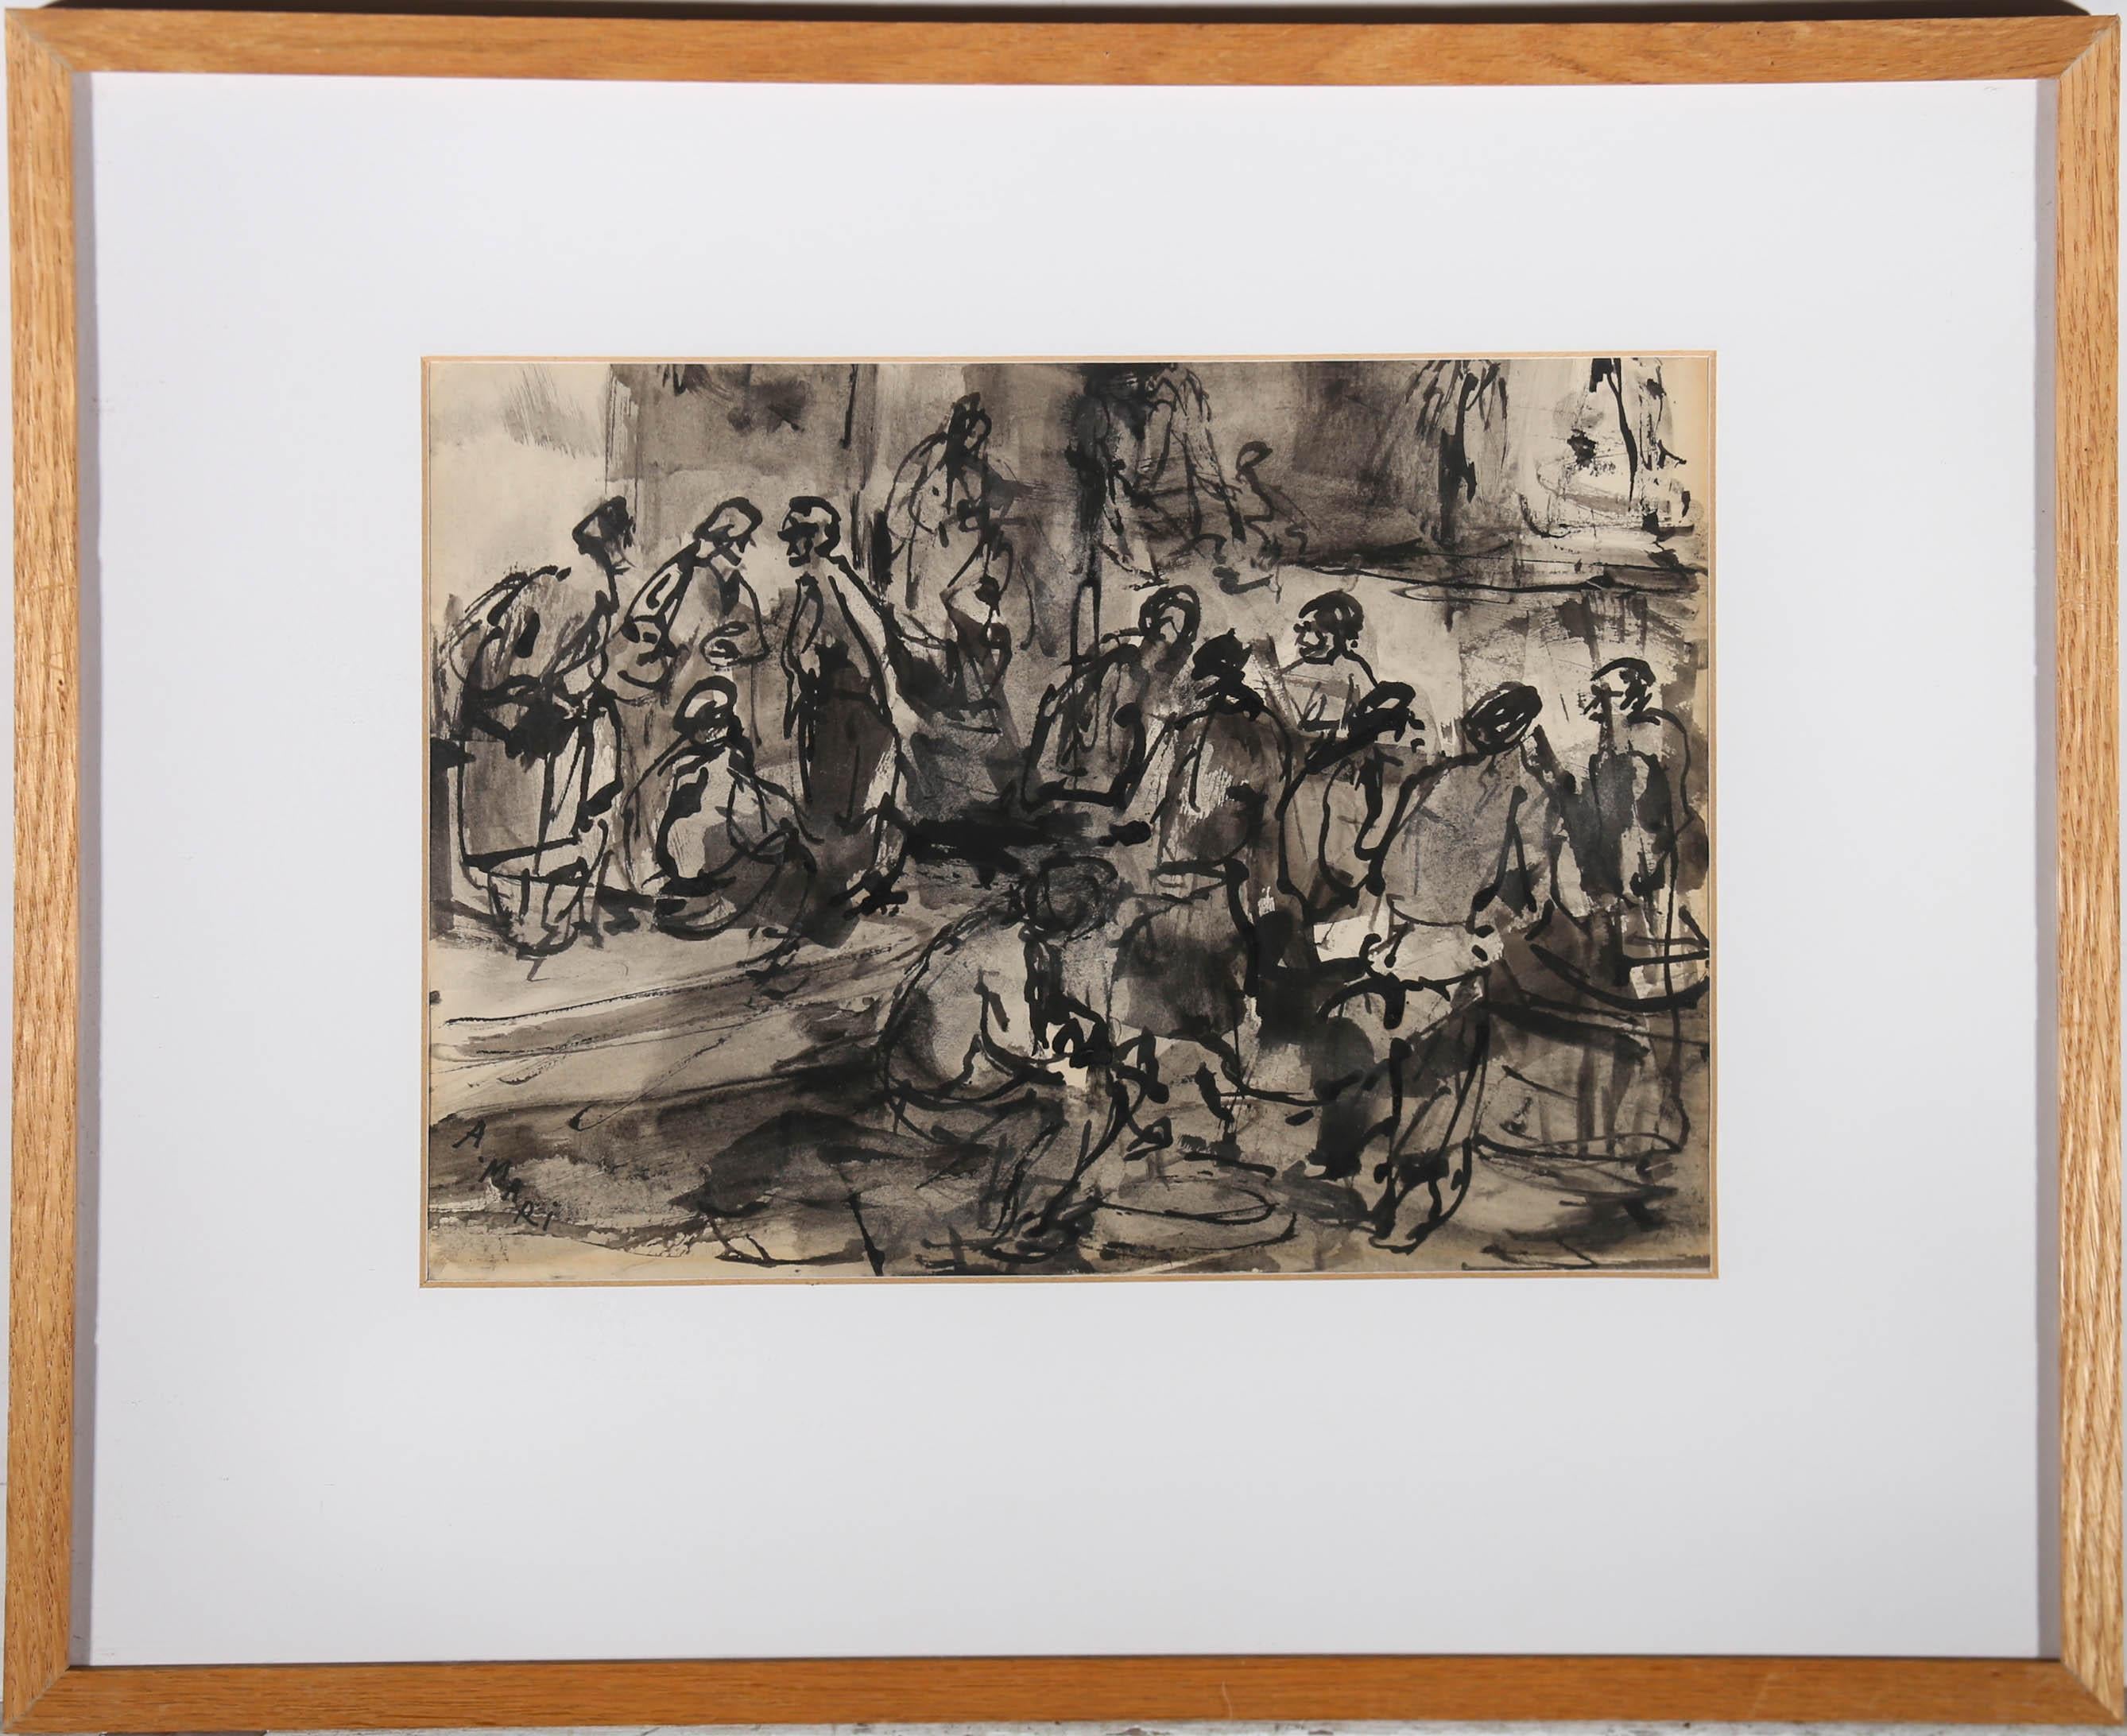 An expressive monochrome scene by Spanish artist Antonio Mari Ribas (1906-1974), depicting figures in a busy market square. Signed to the lower left. Smartly mounted in a natural wood frame. With printed gallery label verso. On paper. 
